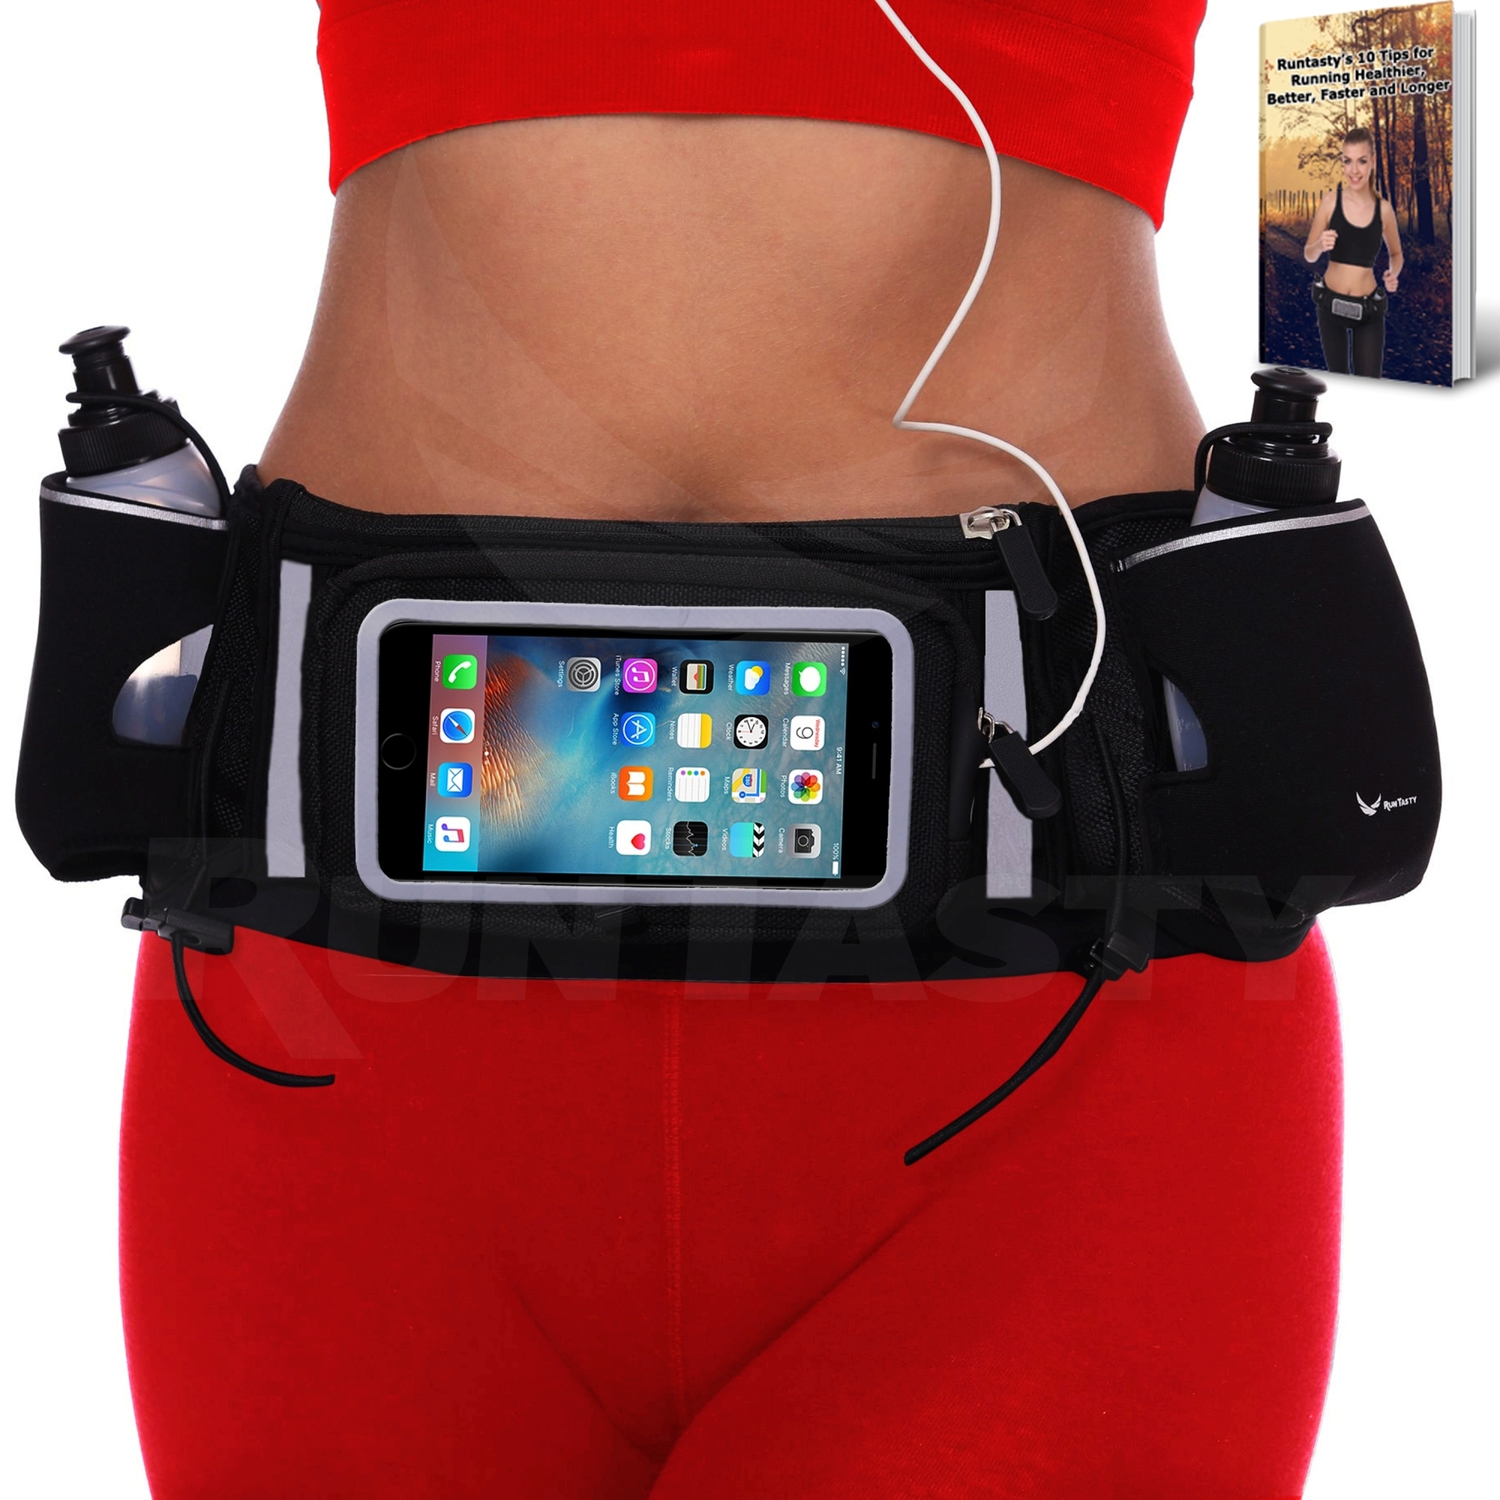 [Voted #1 Hydration Belt] Running Fuel Belt by Runtasty; Includes accessories - 2 BPA Free Water Bottles &amp; Runners Ebook; Fits ANY iPhone; w/Touchscreen cover; "No Bounce" Fit; 100% Guarantee!&nbsp;